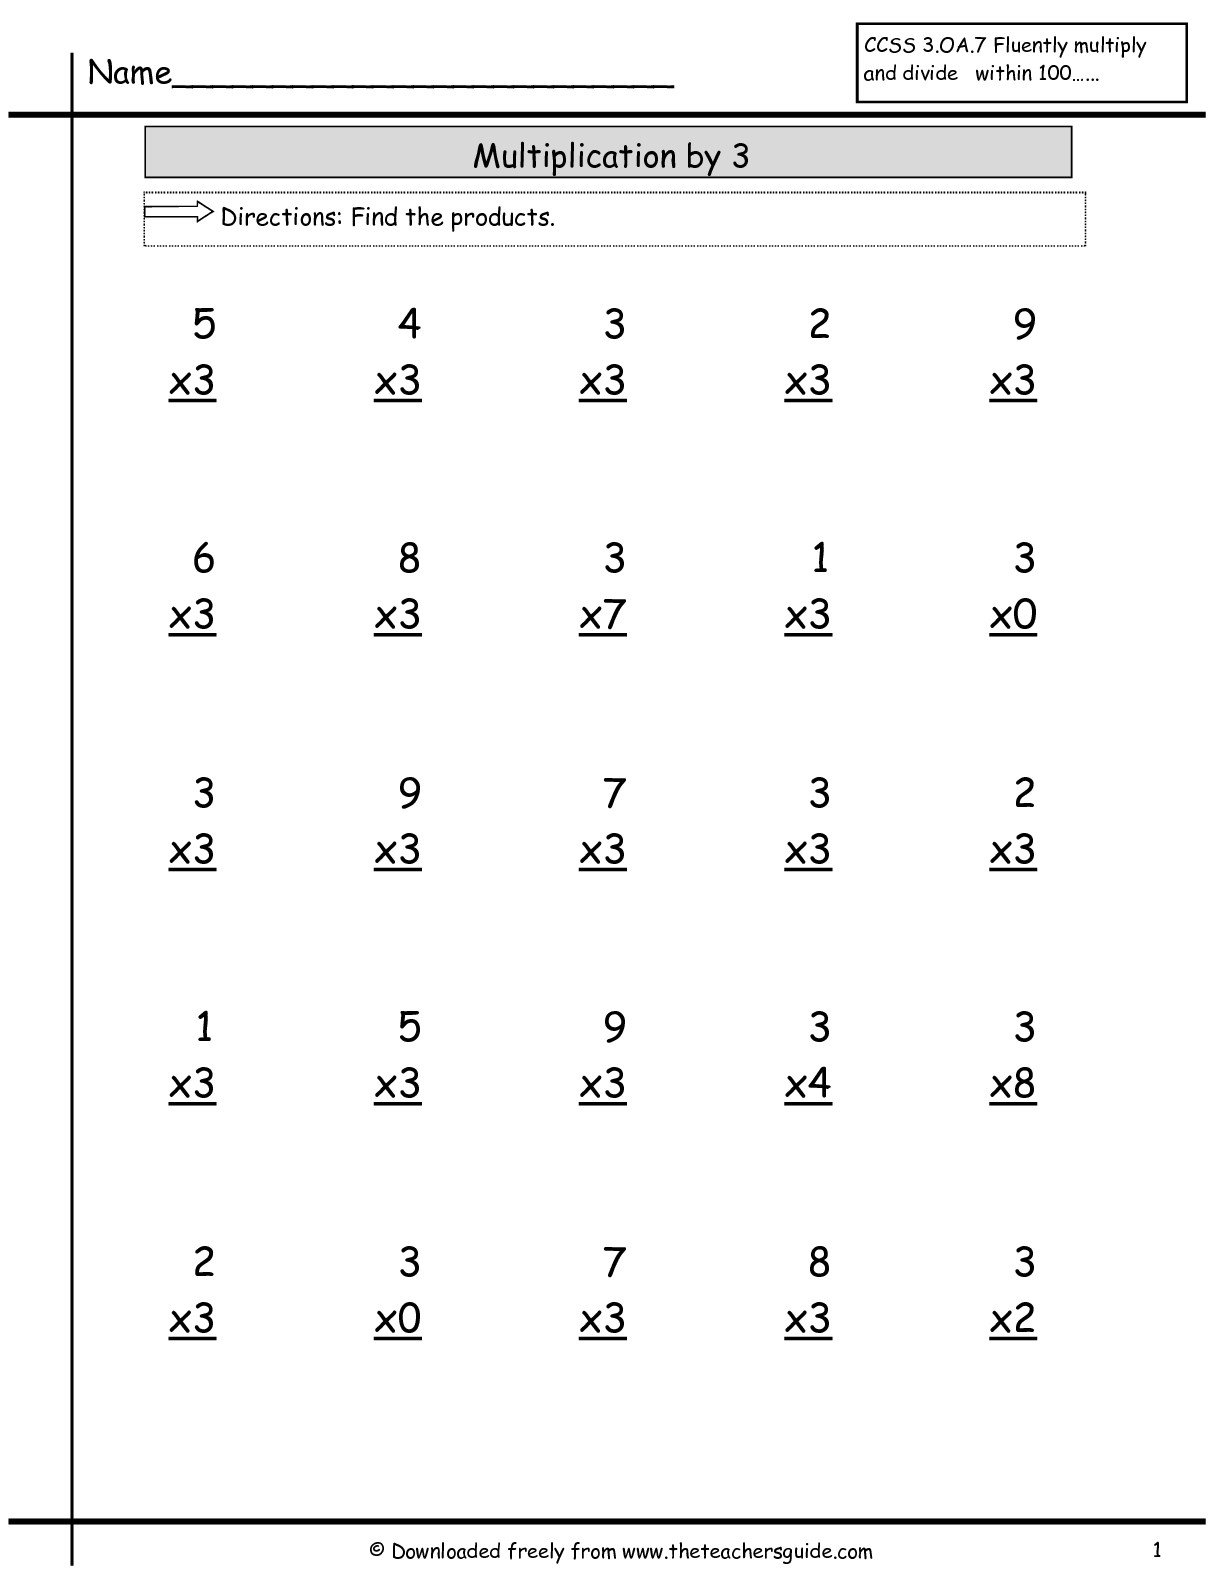 Multiplication By 3 Worksheets Free The Best Worksheets Image